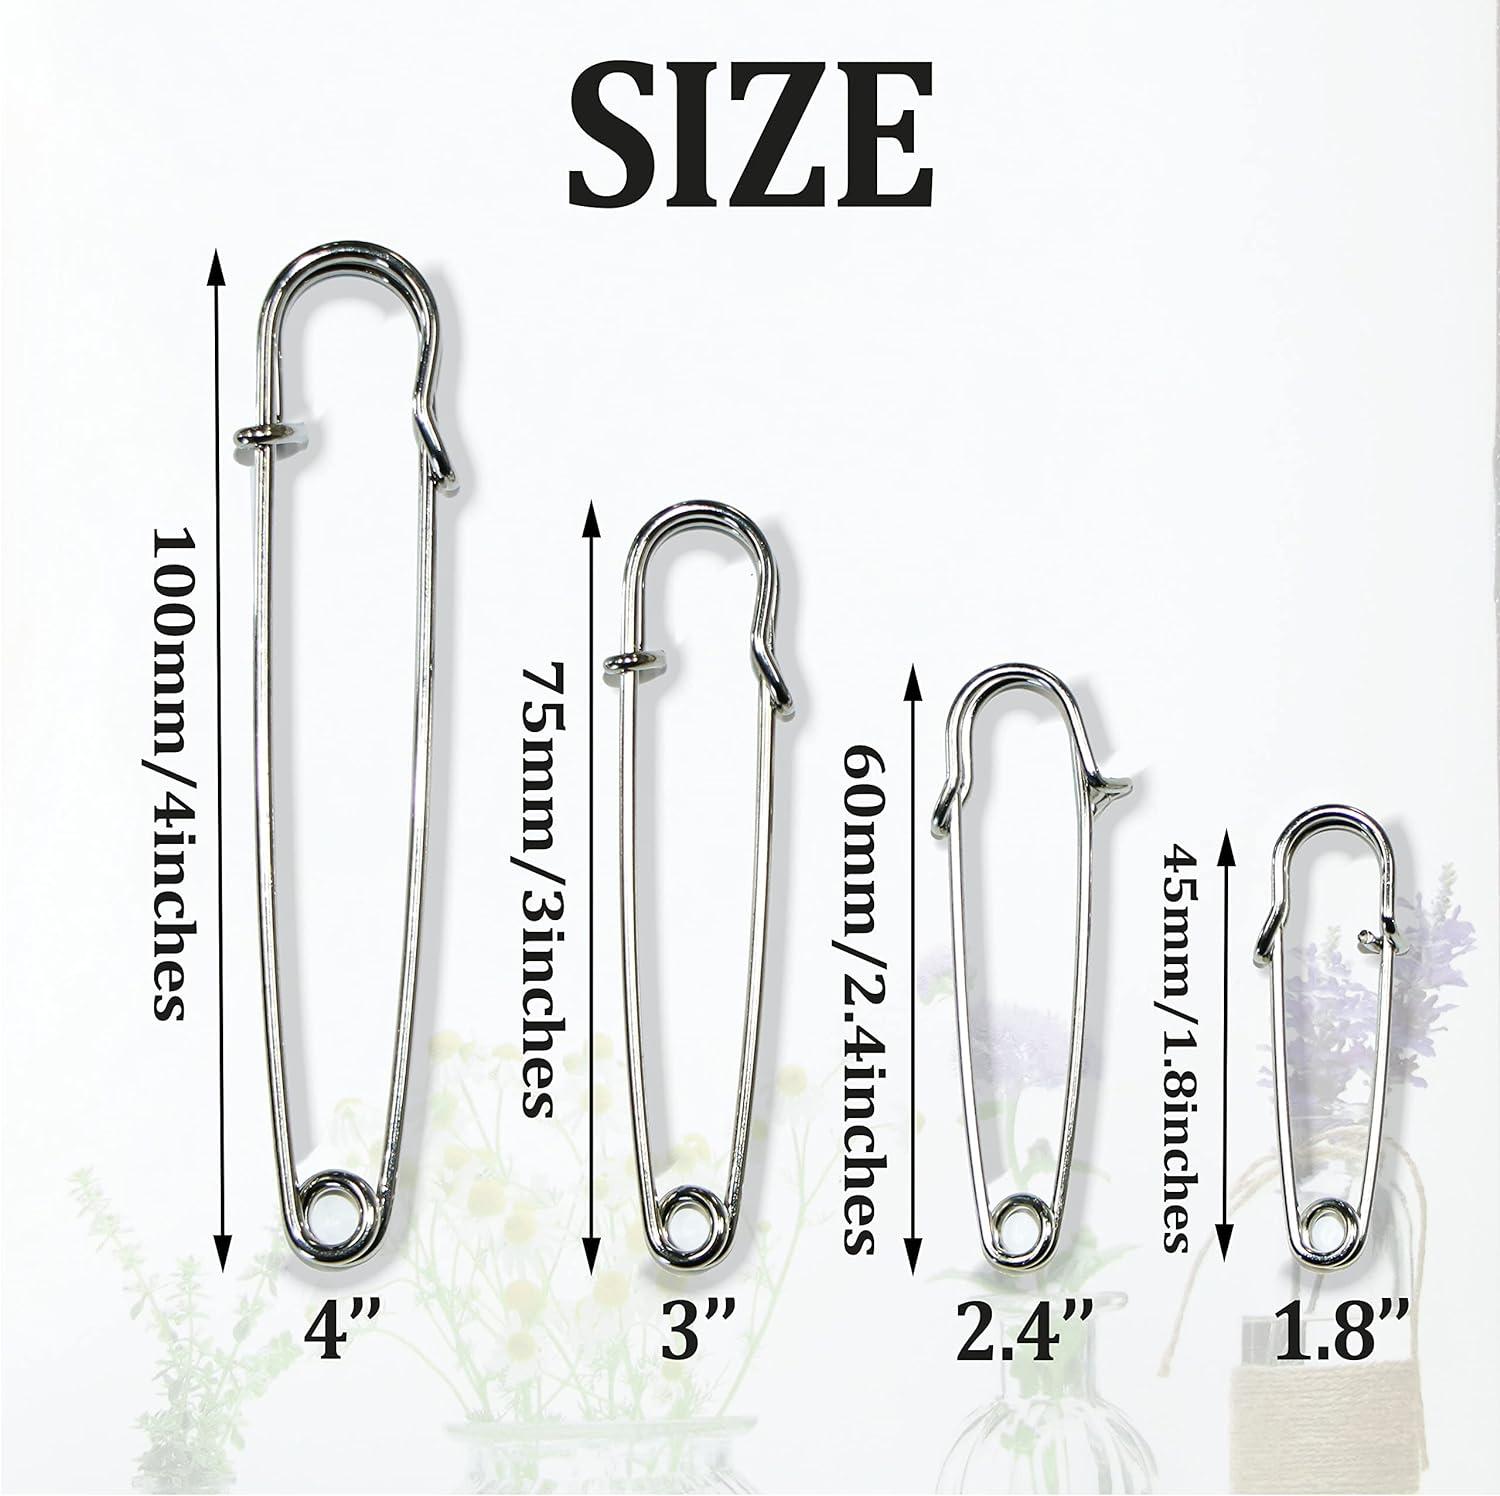 Sew Easy Curved Safety Pins Silver